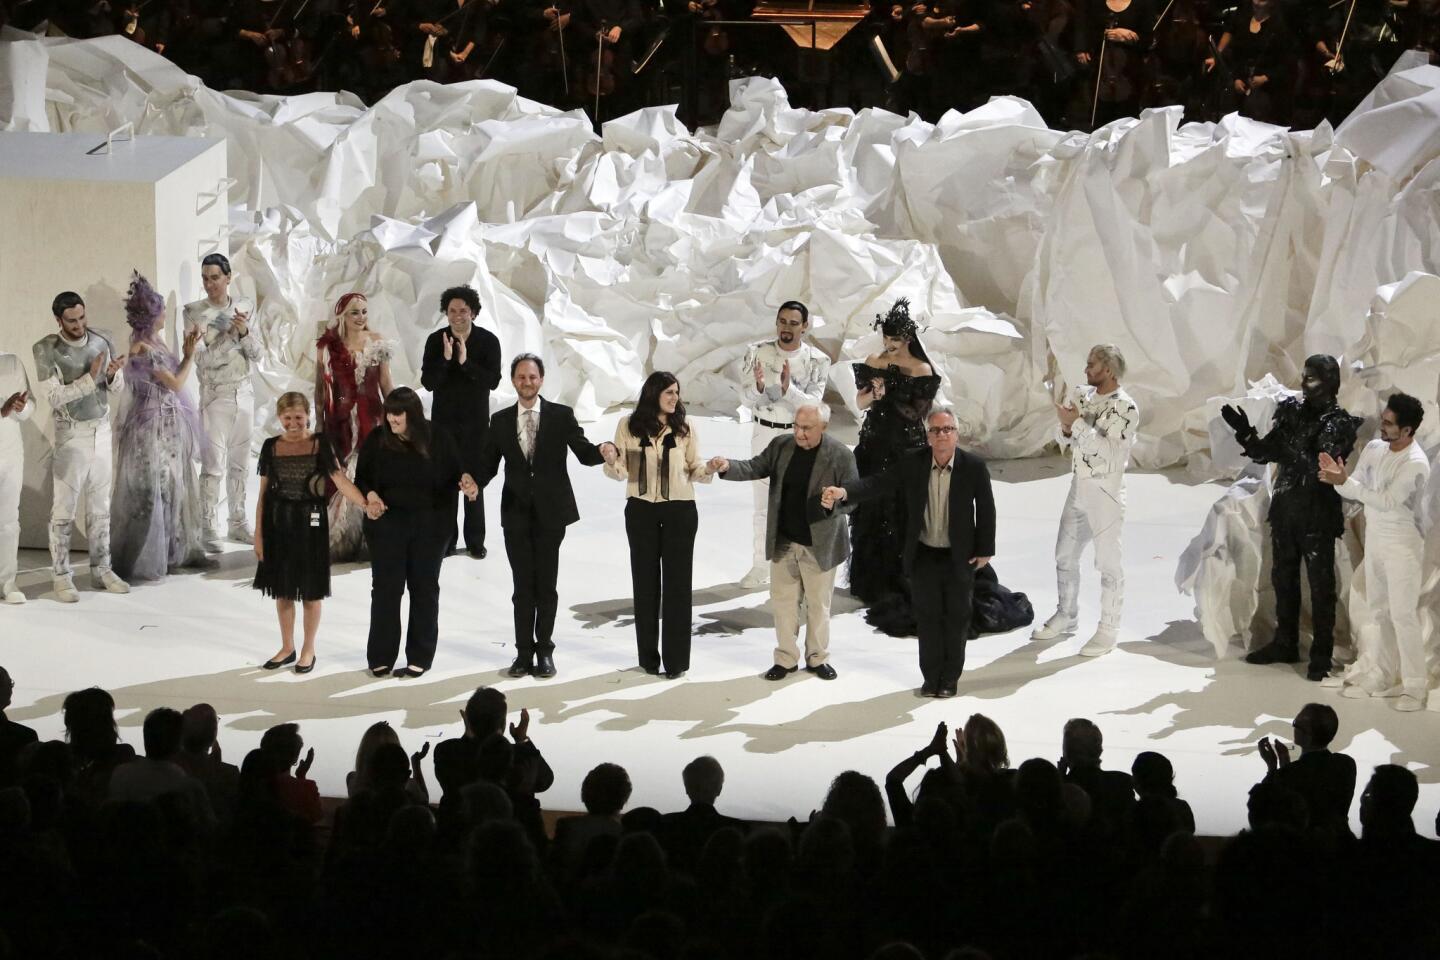 Dudamel's ongoing three-year project of staging Mozart operas with sets and costumes by famed architects and designers has been the most ambitious undertaking at Disney yet. It began with a site-specific "Don Giovanni" enacted amid crumpled paper sculptures by Frank Gehry.